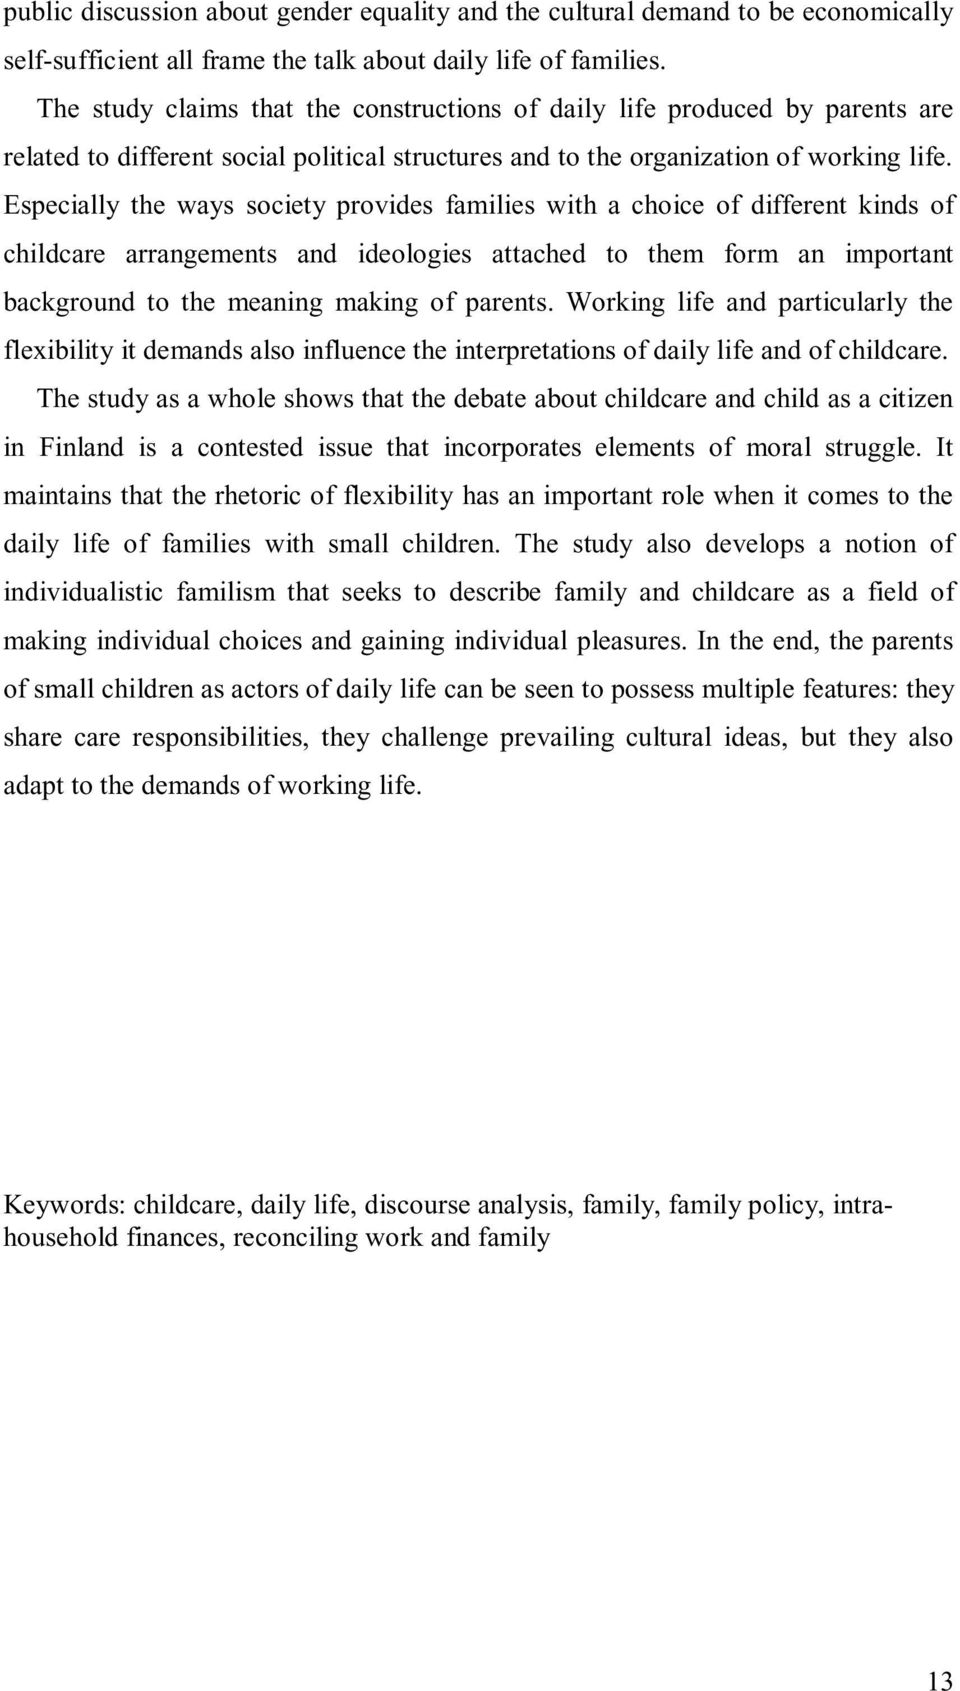 Especially the ways society provides families with a choice of different kinds of childcare arrangements and ideologies attached to them form an important background to the meaning making of parents.